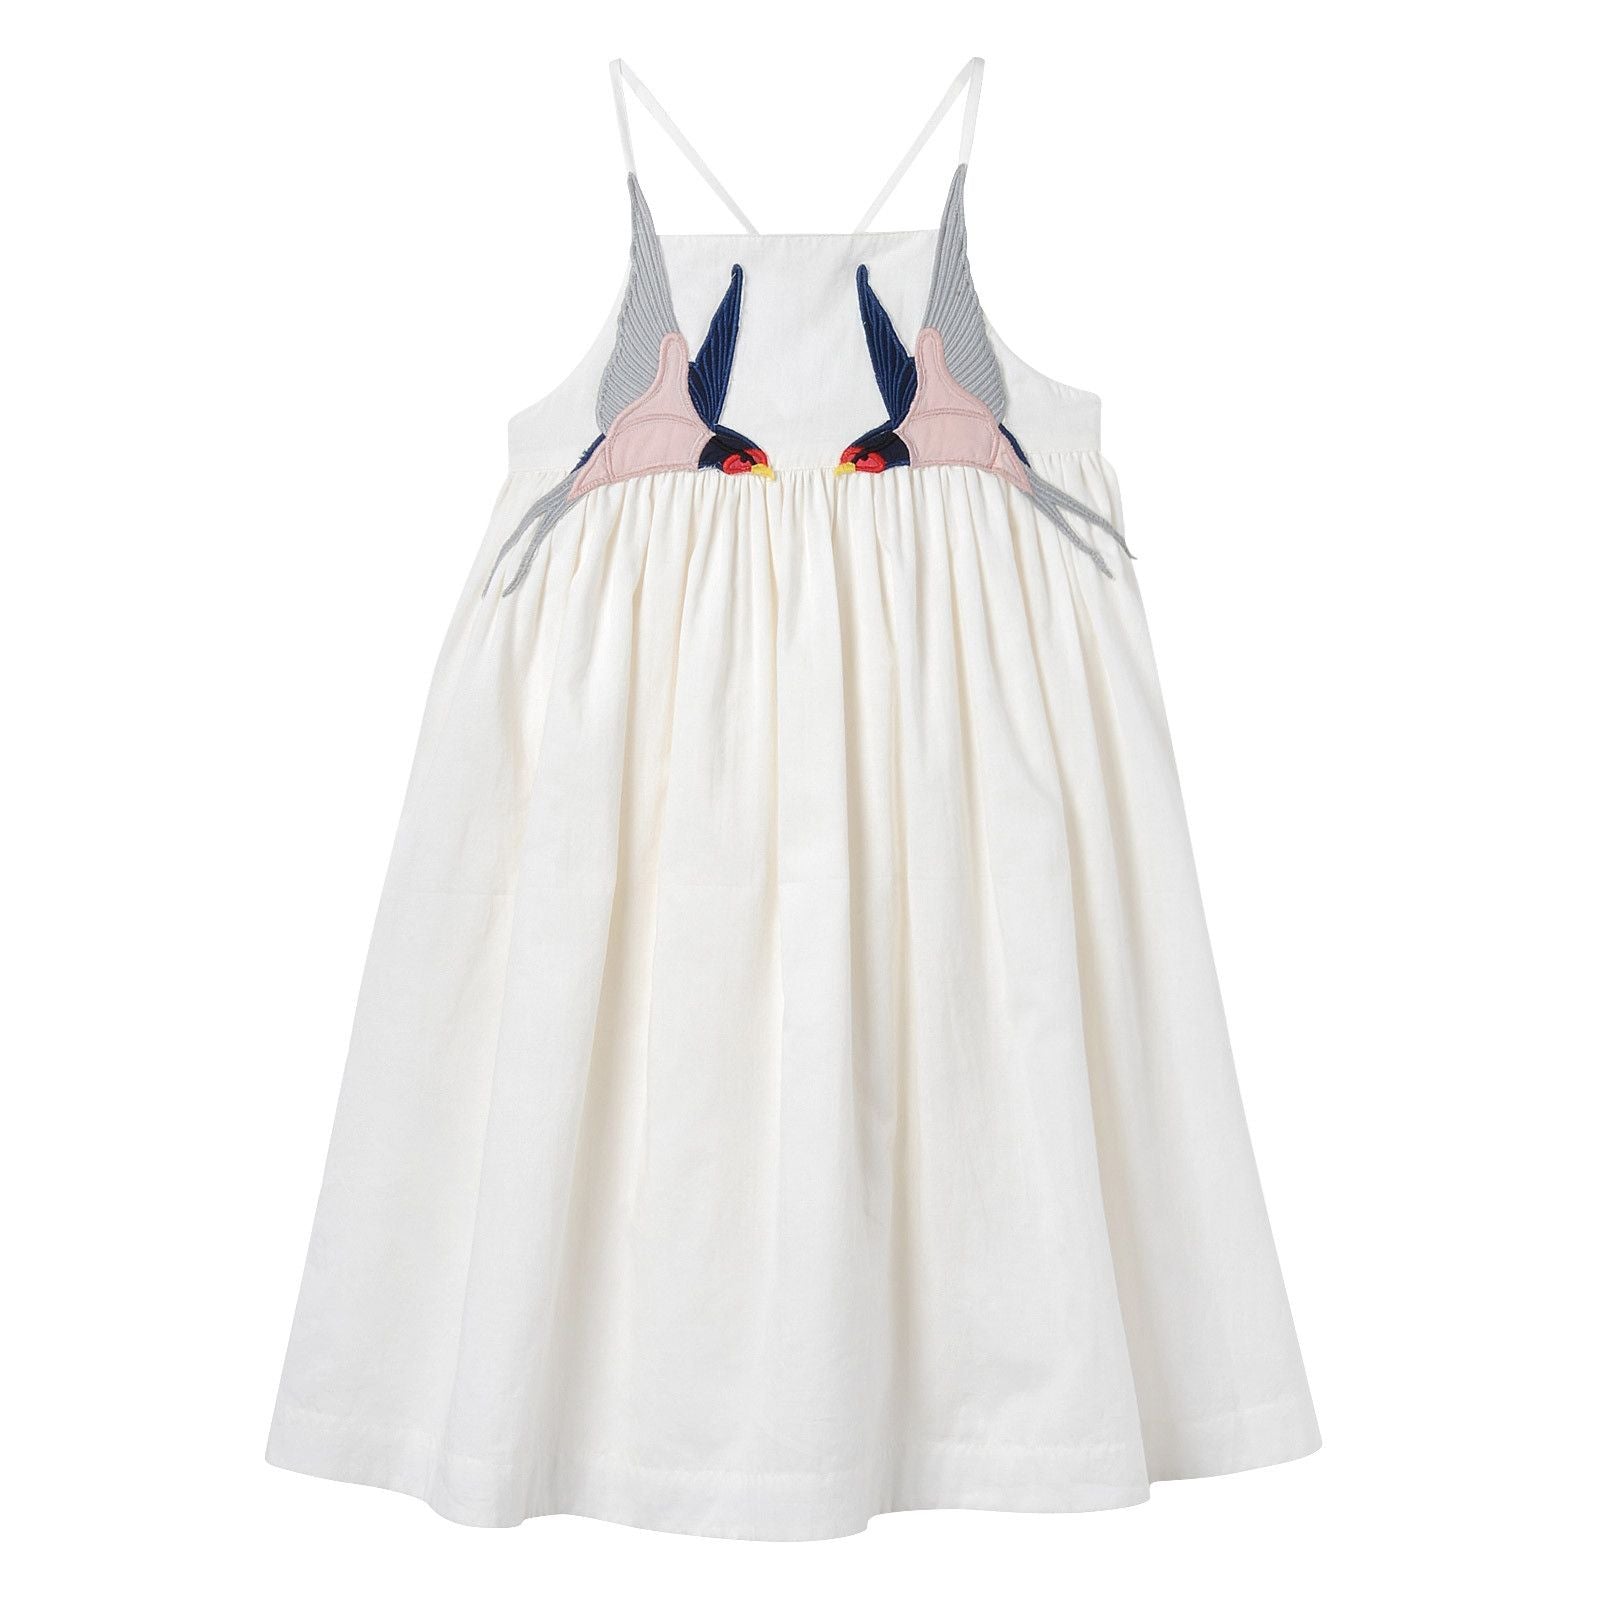 Girls White Cotton Woven Dress With Bird Embroidered Trims - CÉMAROSE | Children's Fashion Store - 1